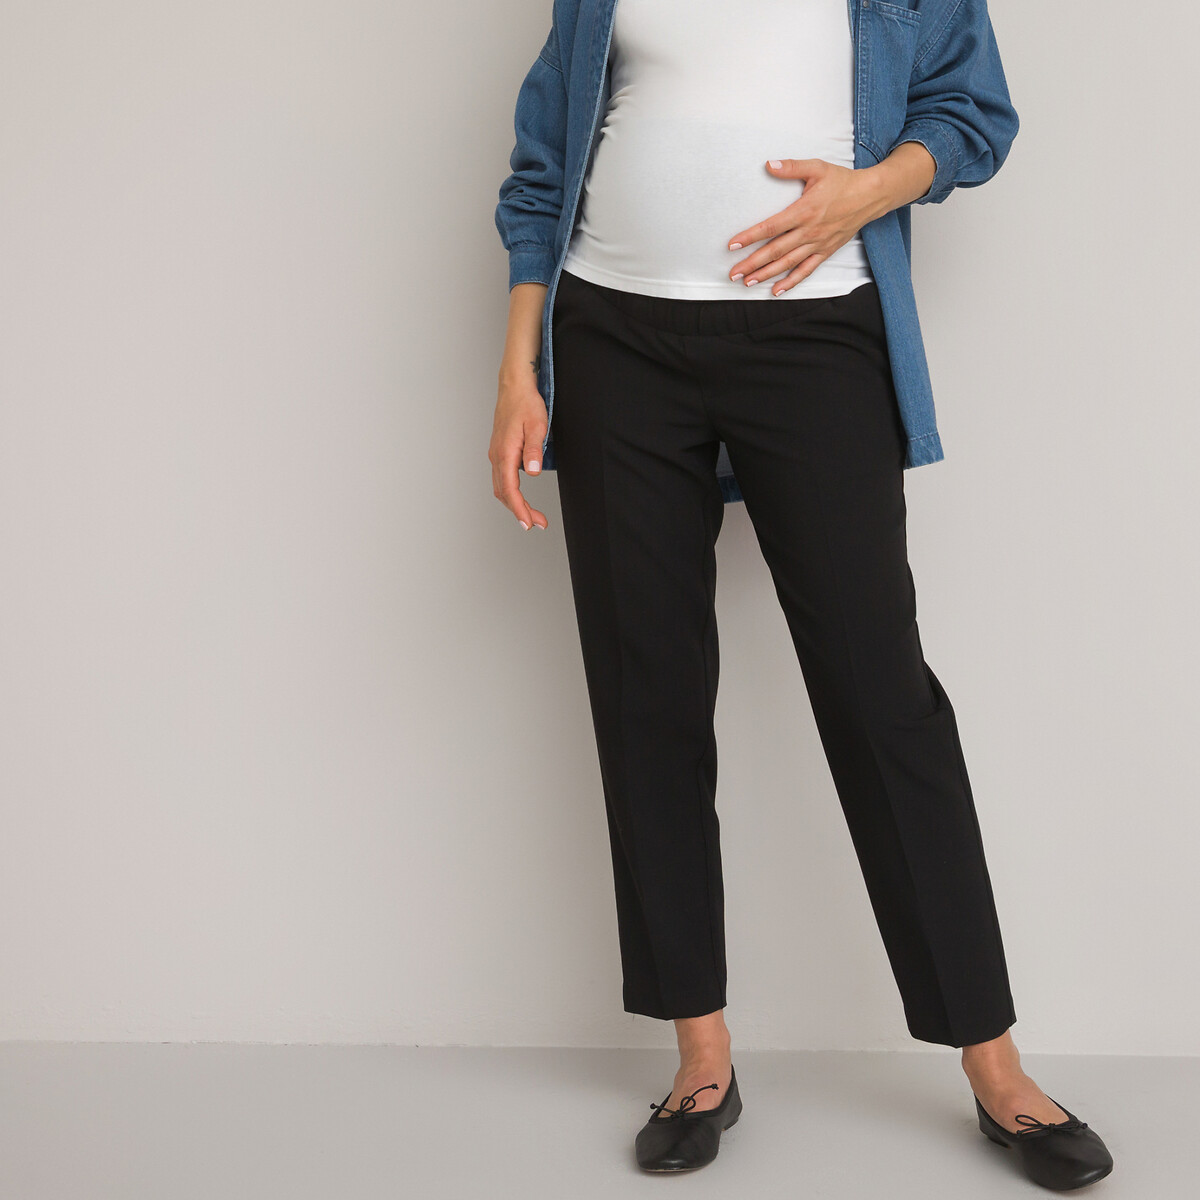 Recycled Maternity Cigarette Trousers, Length 27.5"